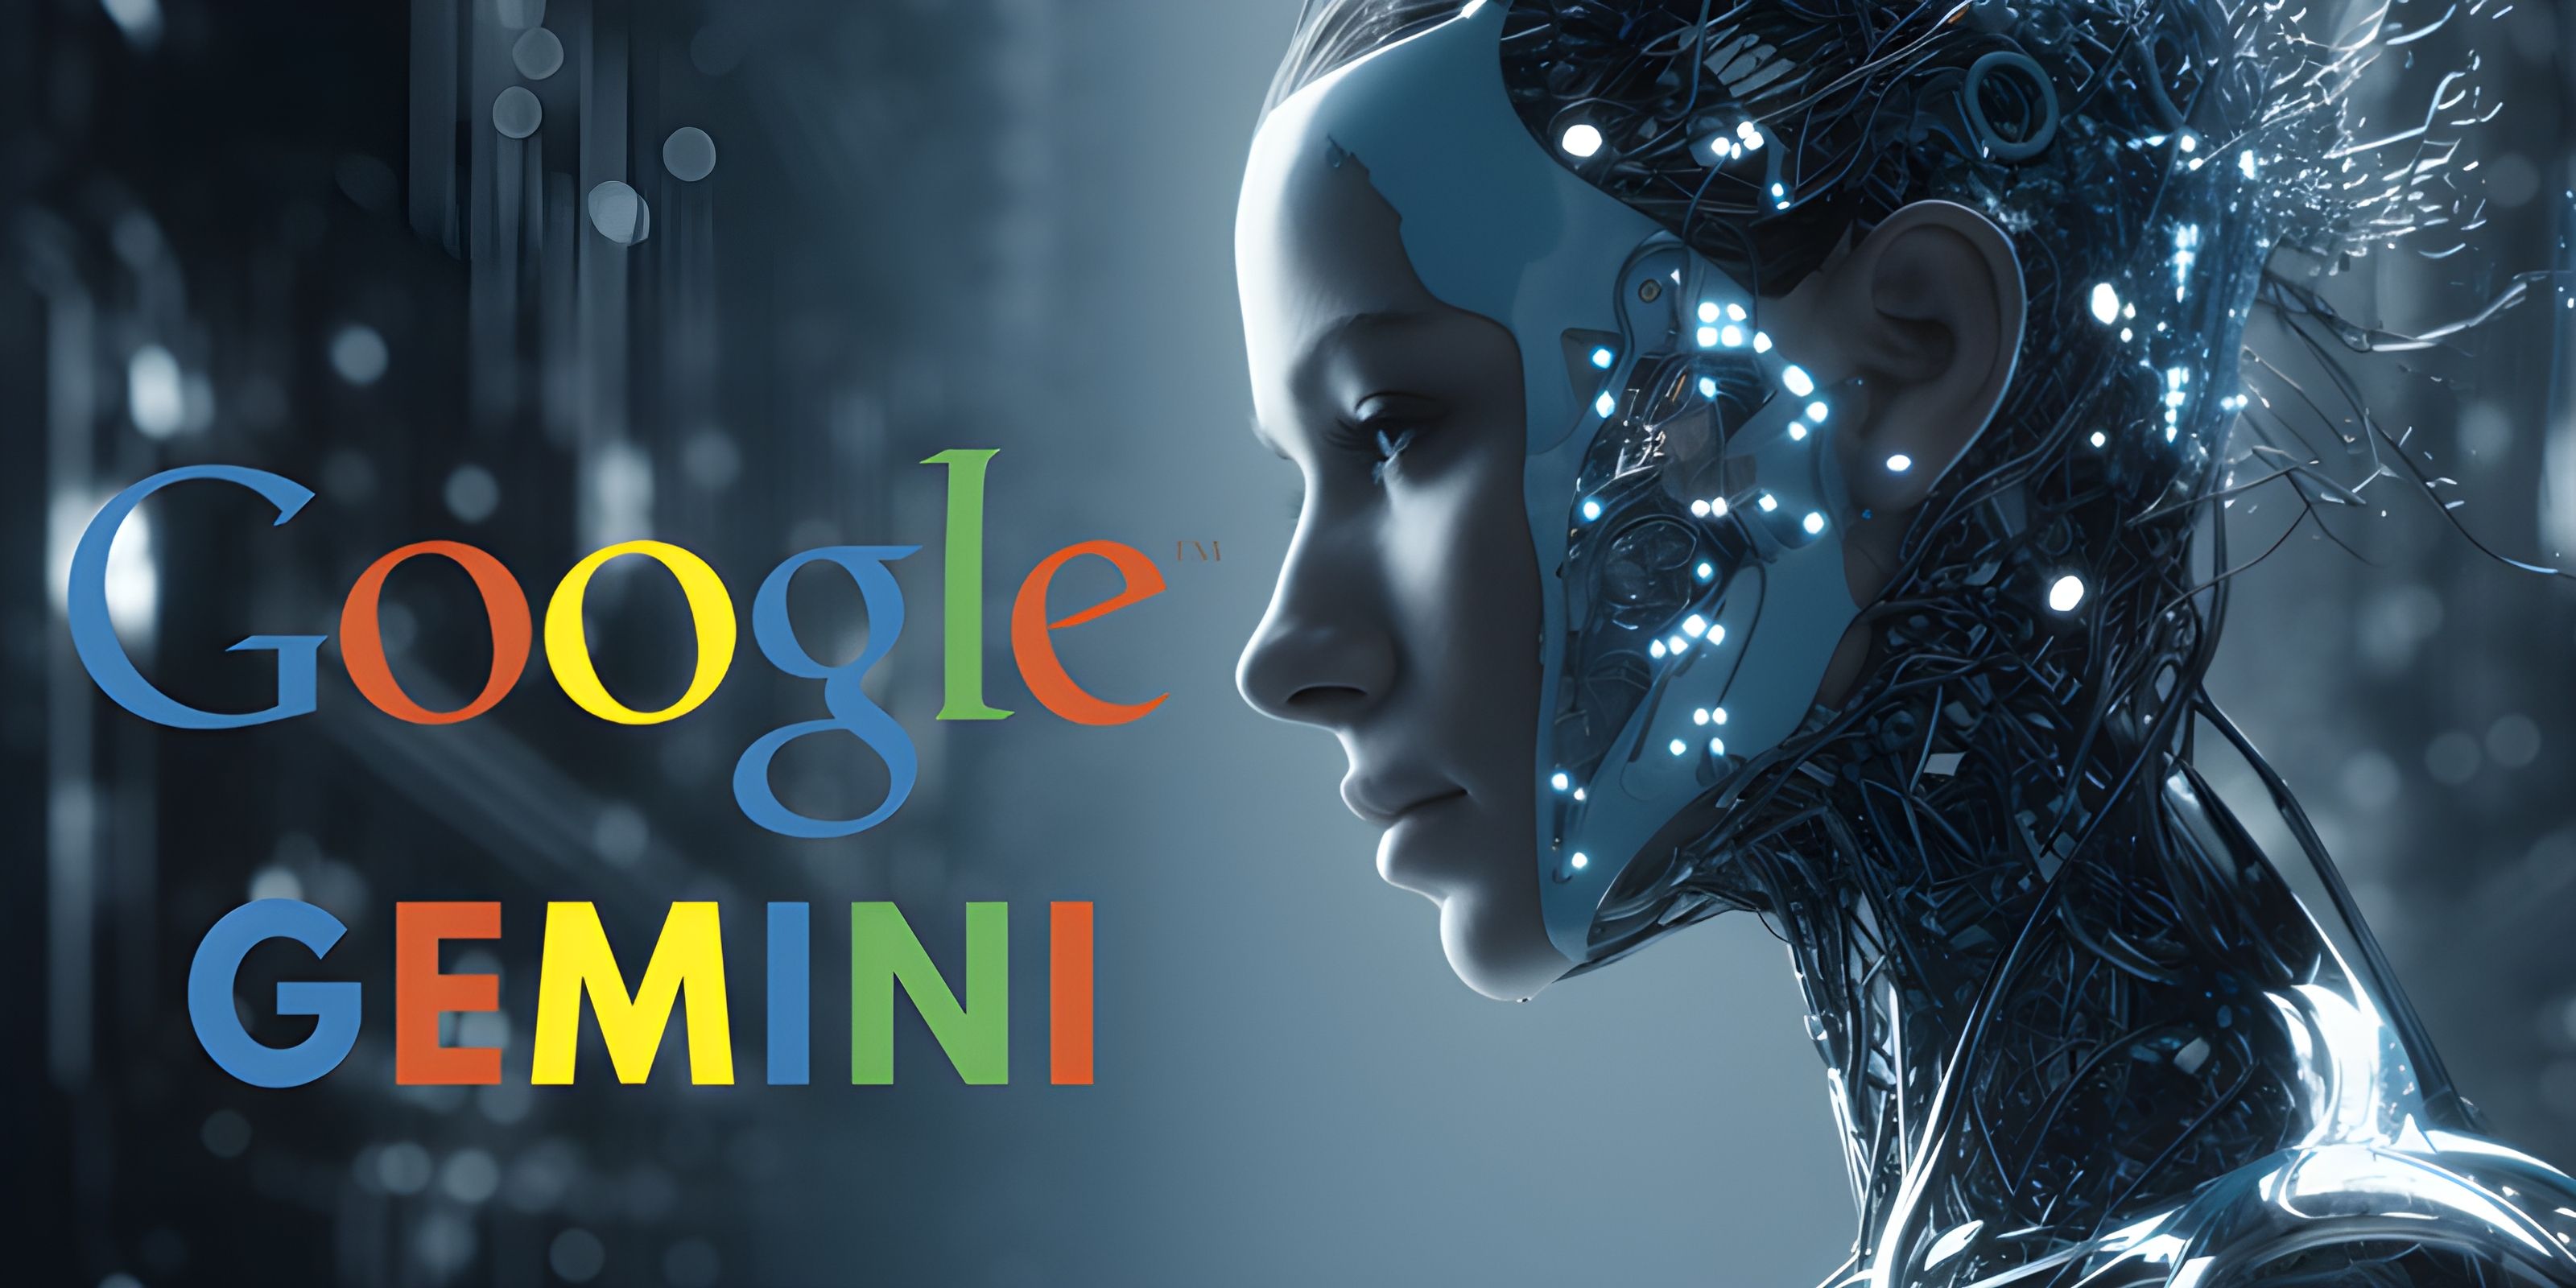 Google Approaches Launch of AI Platform Gemini - Industry Insights